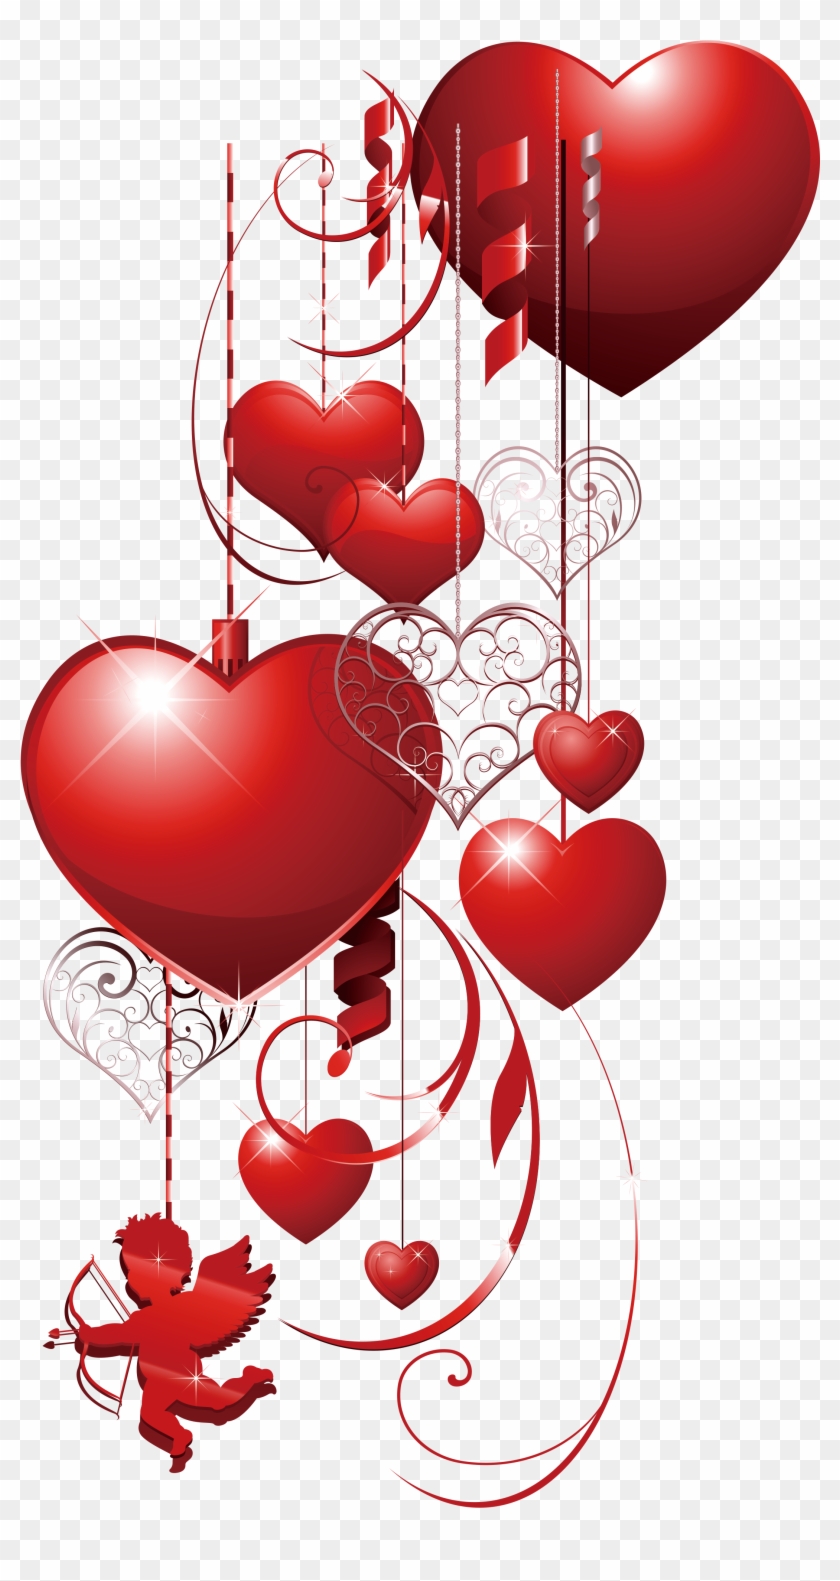 Valentines Day Heart Scalable Vector Graphics Clip - Valentines Day Heart Scalable Vector Graphics Clip #304462